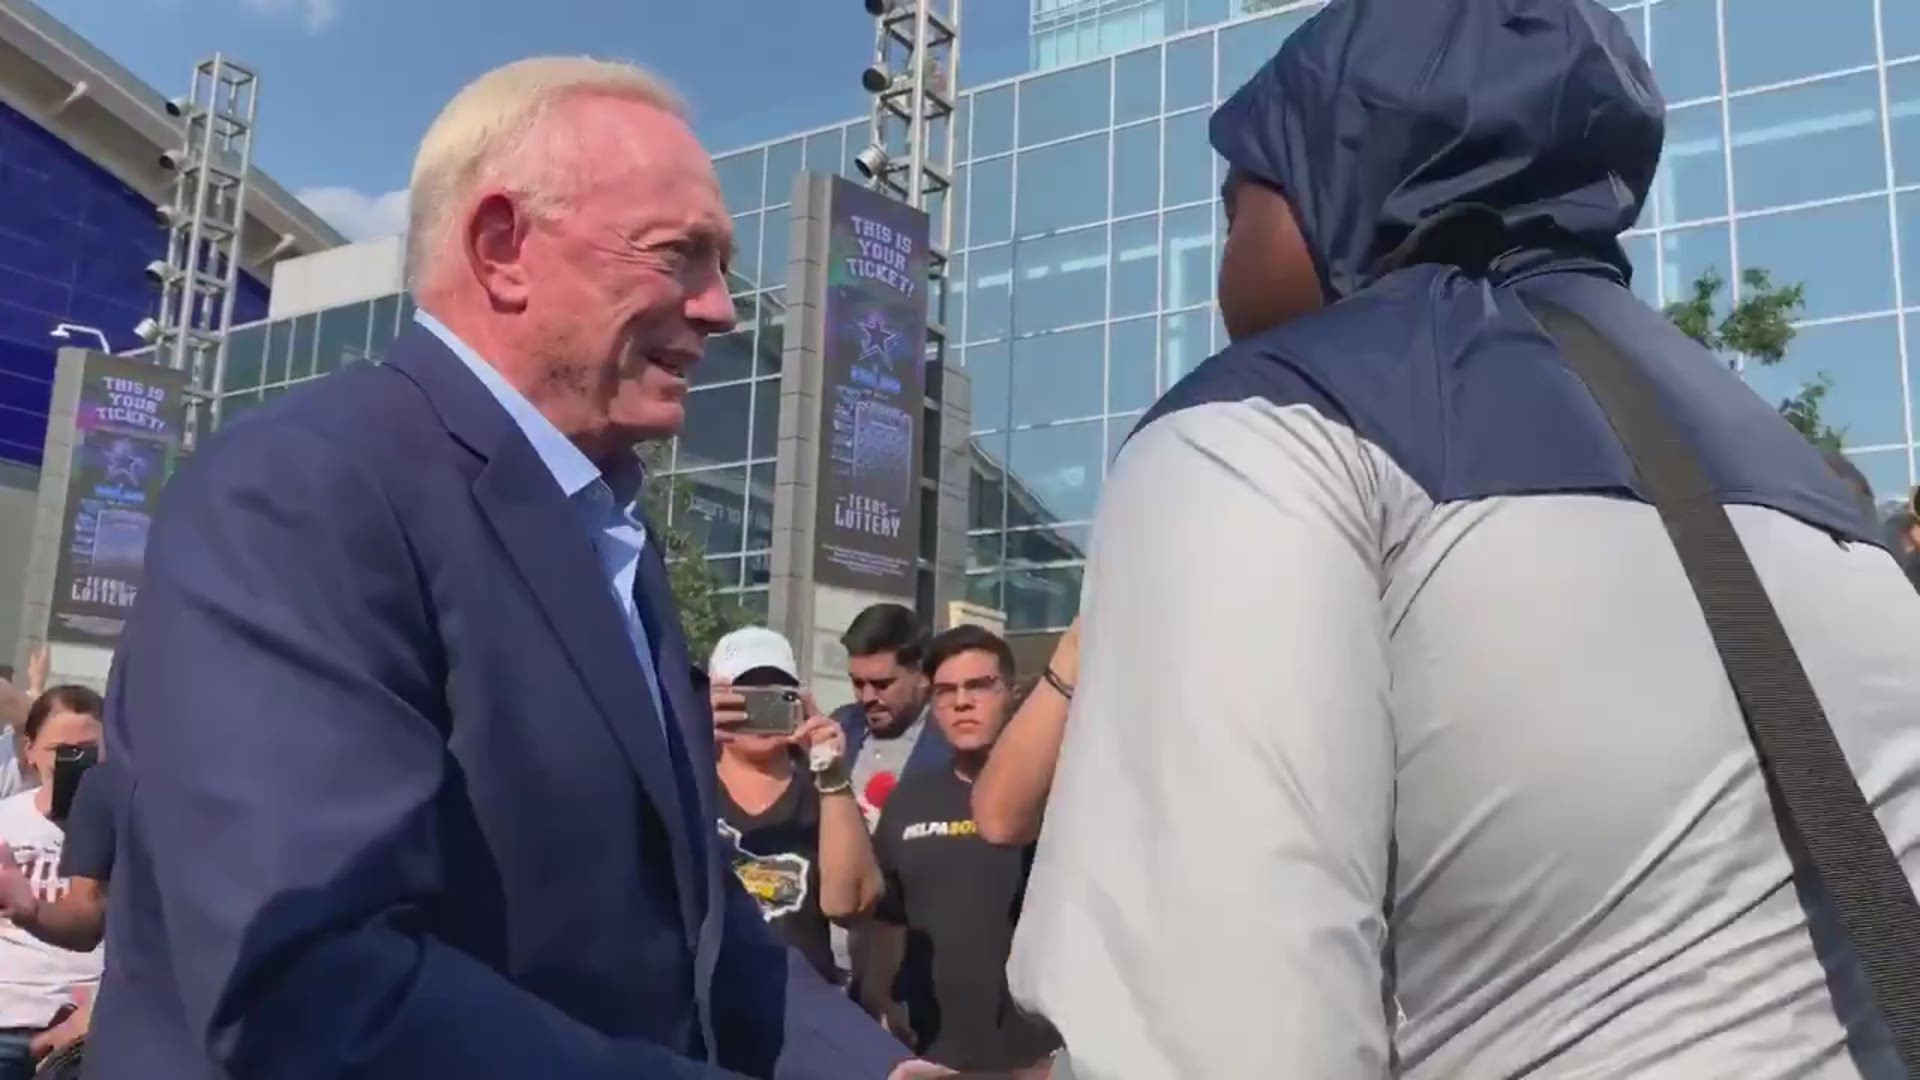 The Dallas Cowboys owner greeted the high school football players from El Paso as they arrived at The Star in Frisco, Texas, to take on Plano High School.